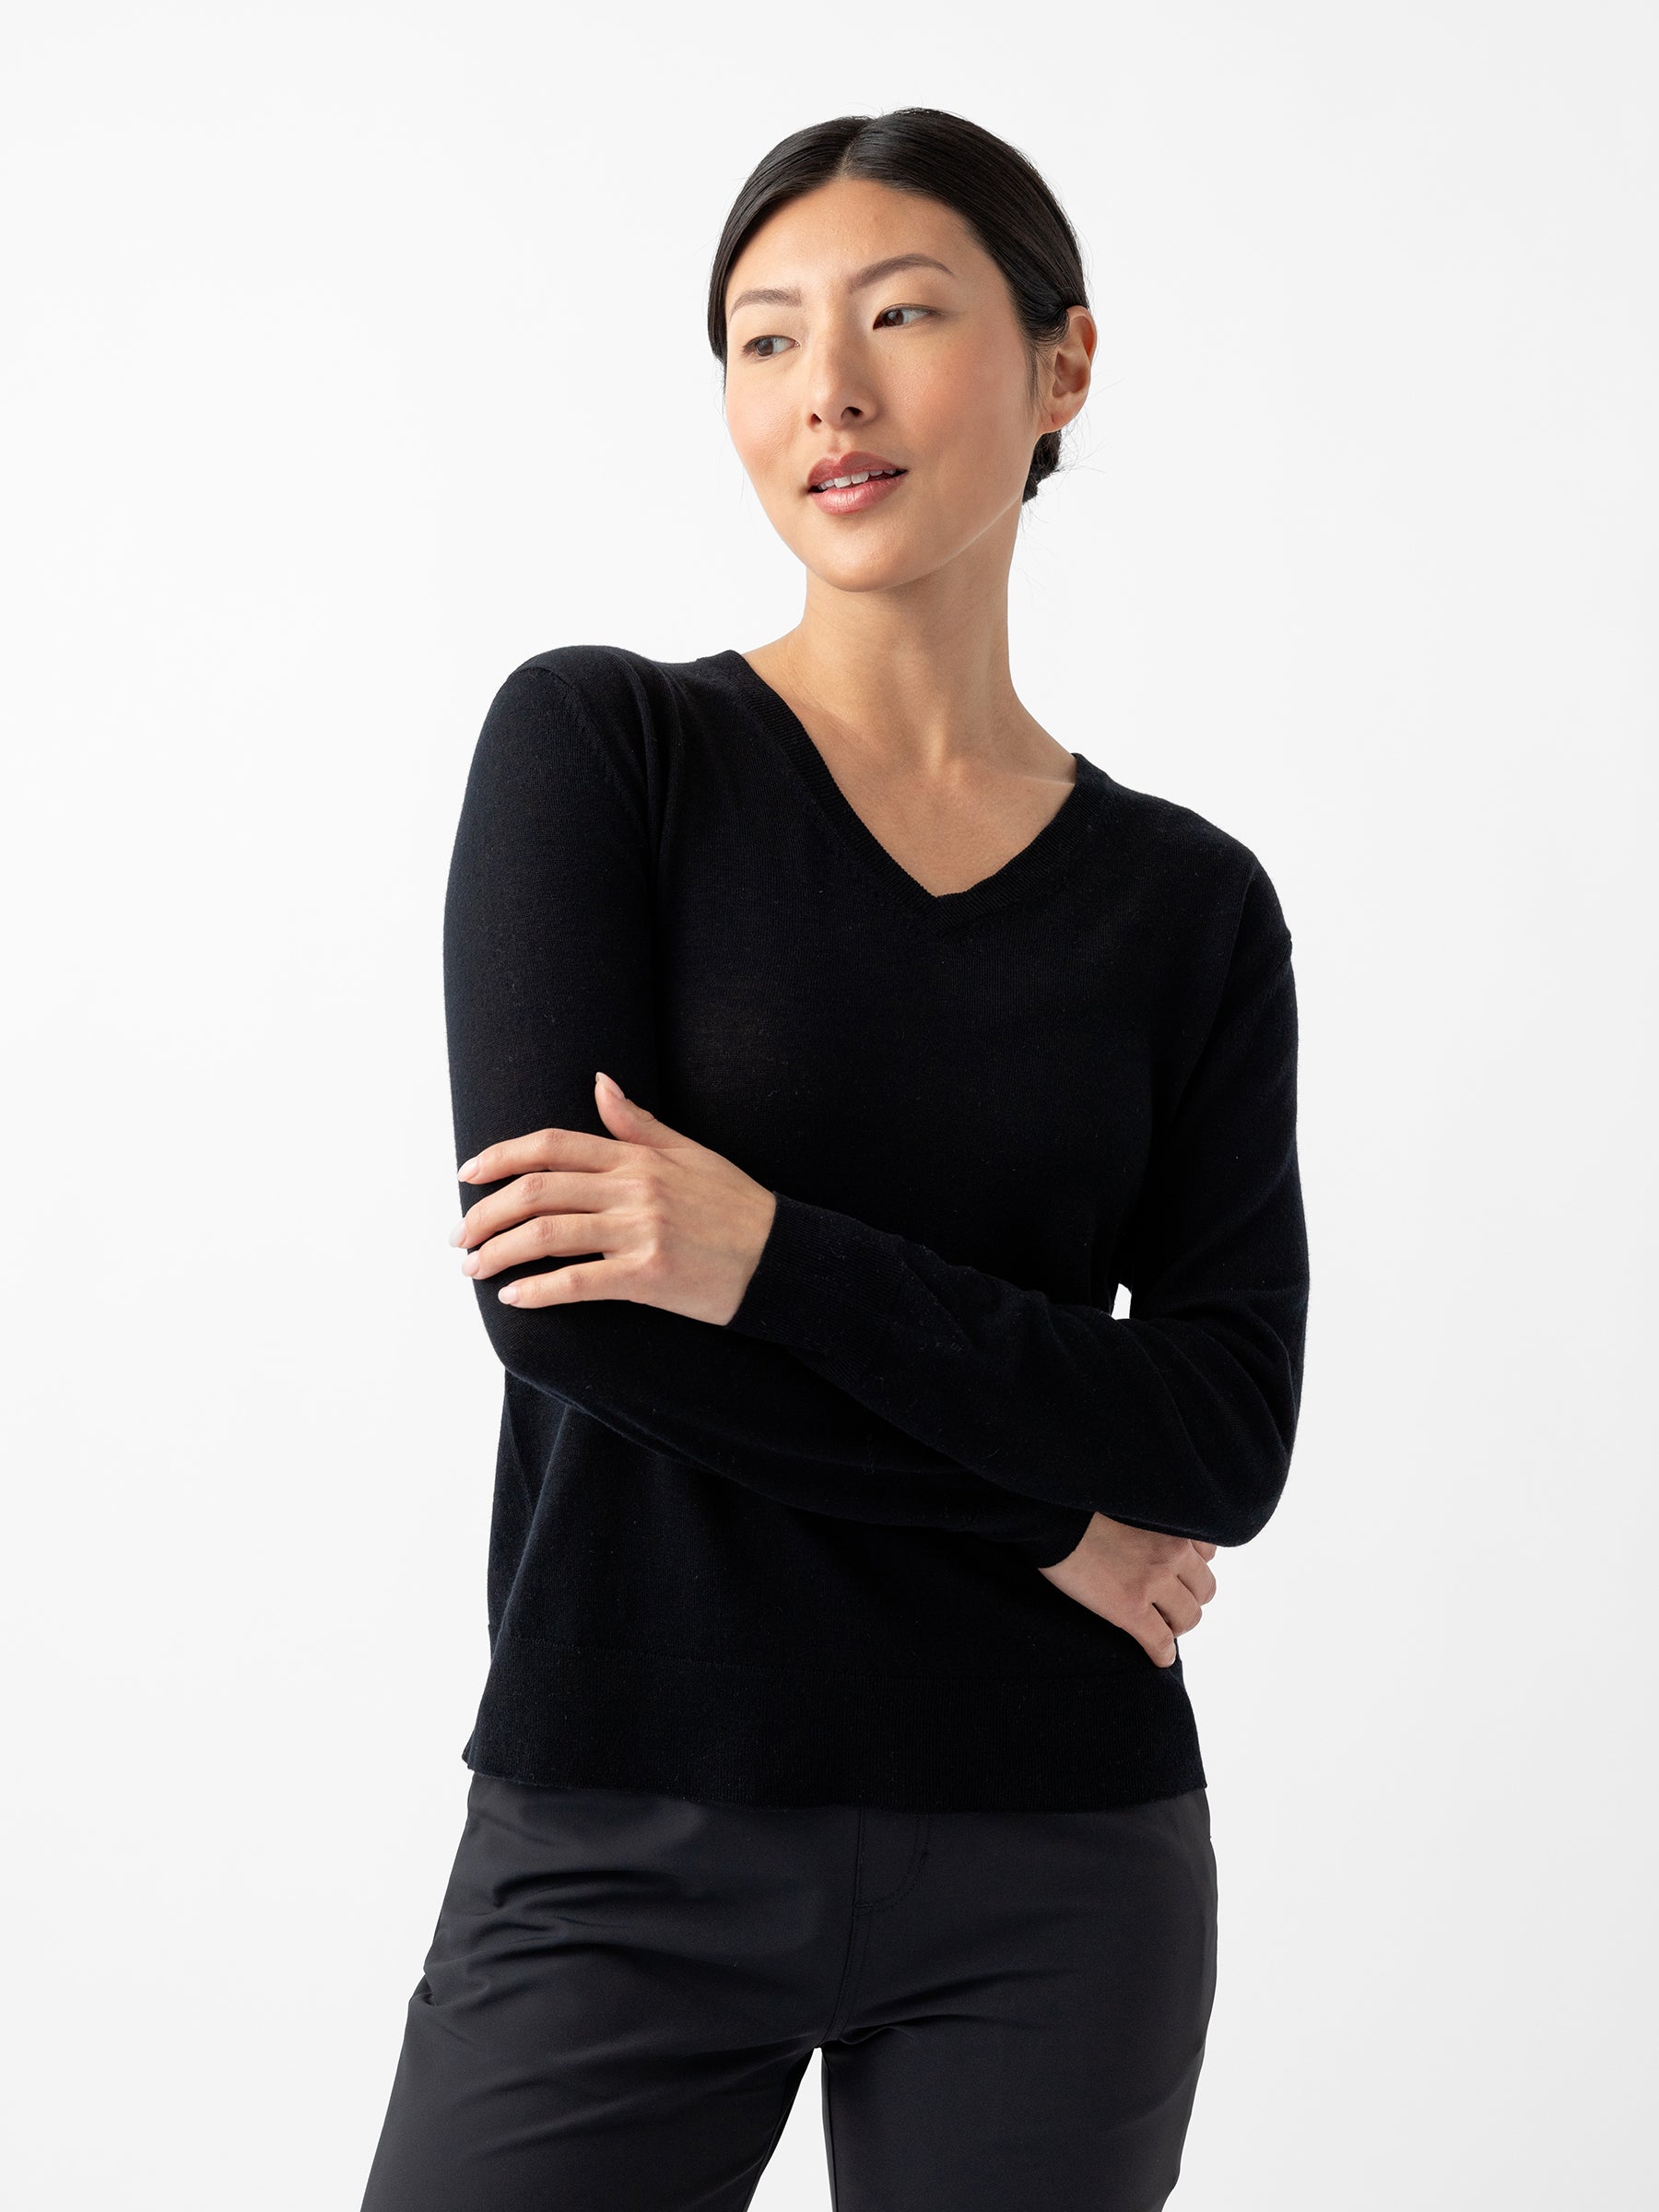 A woman with dark hair is wearing a Cozy Earth Women's AirKnit V-Neck Sweater in black along with black pants. She is standing with her arms crossed and looking slightly to the side with a neutral expression. The background is plain white. |Color:Jet Black